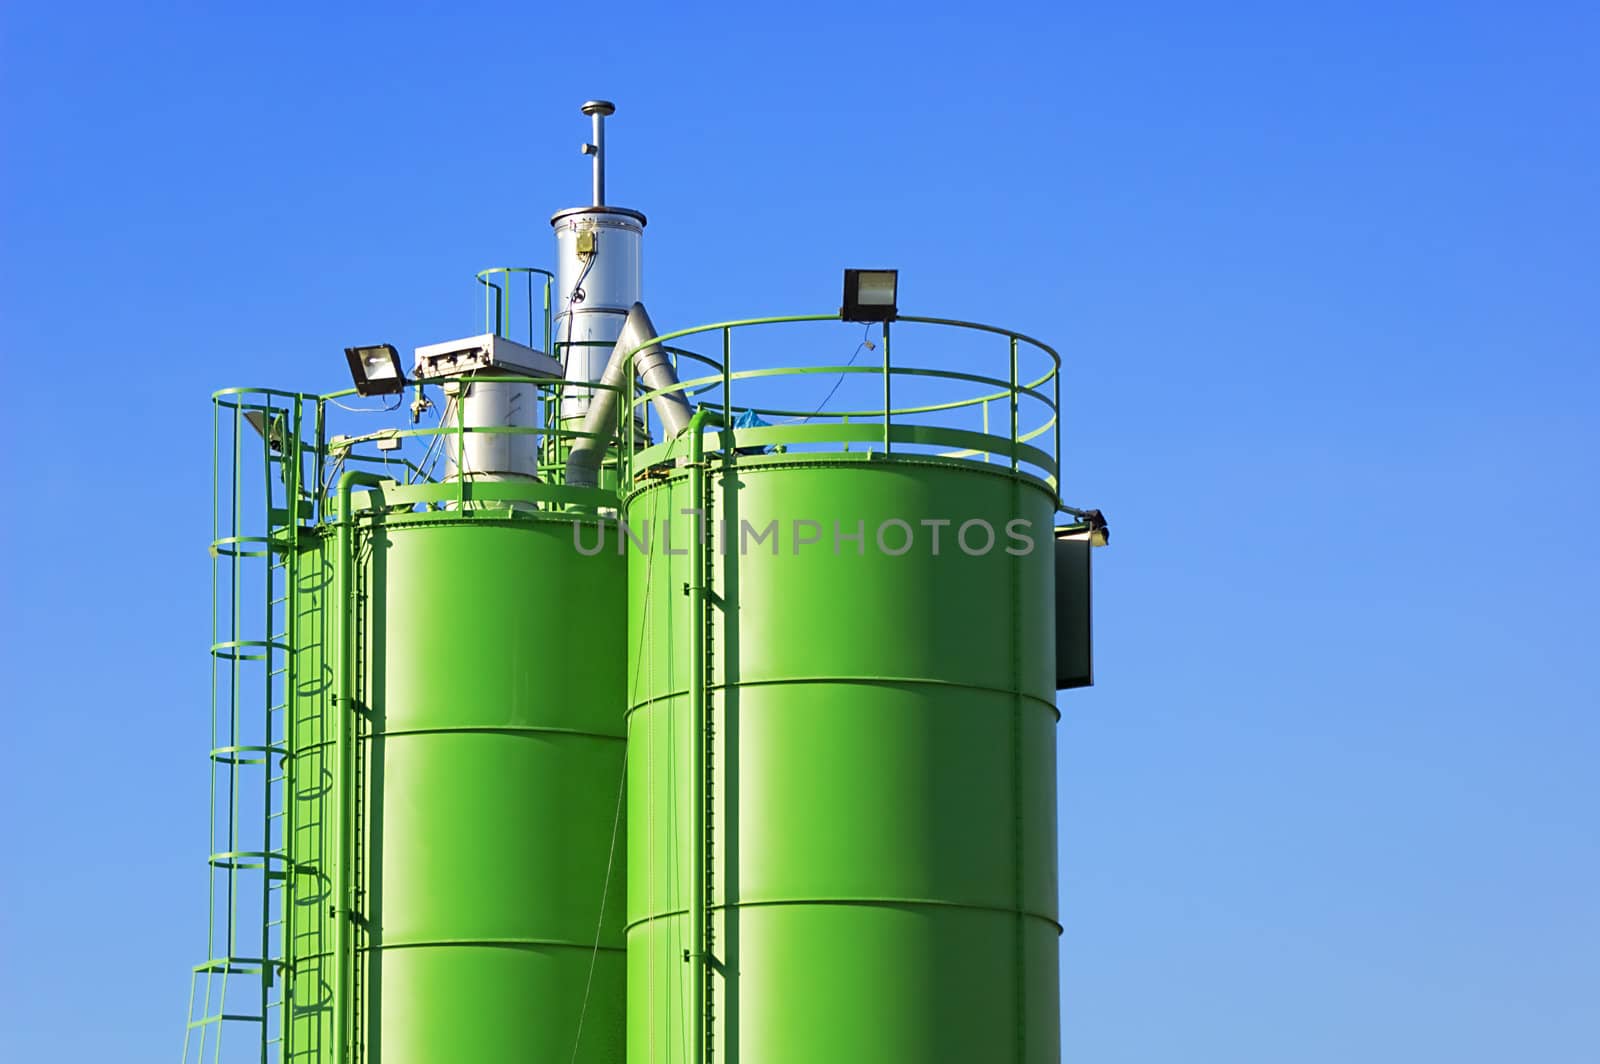 Two green silos agaist blue sky in a construction site